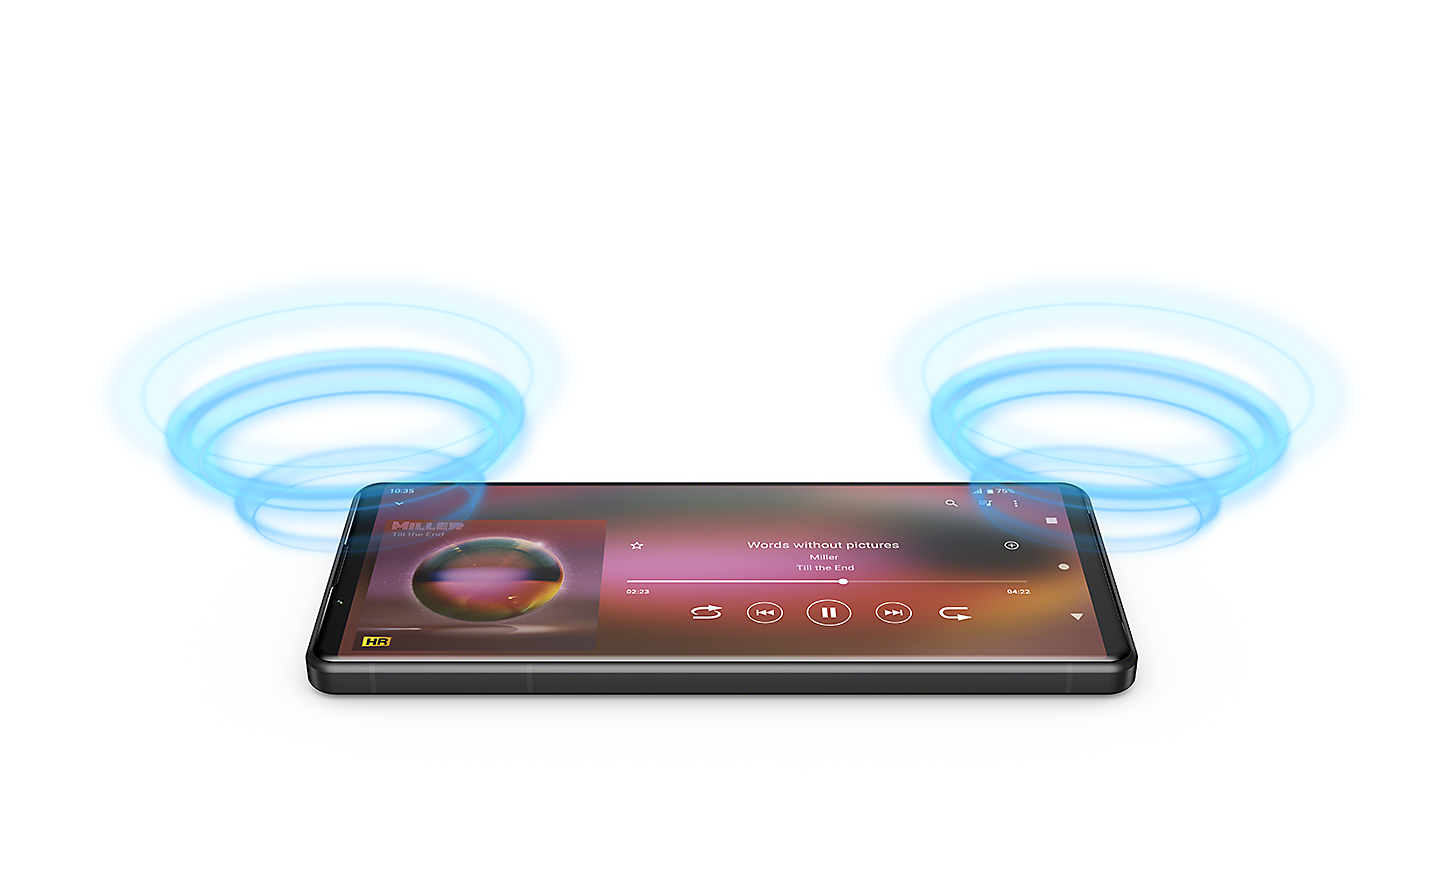 Xperia 5 IV with music player UI on its display and illustrated blue soundwaves emerging at either end of the phone